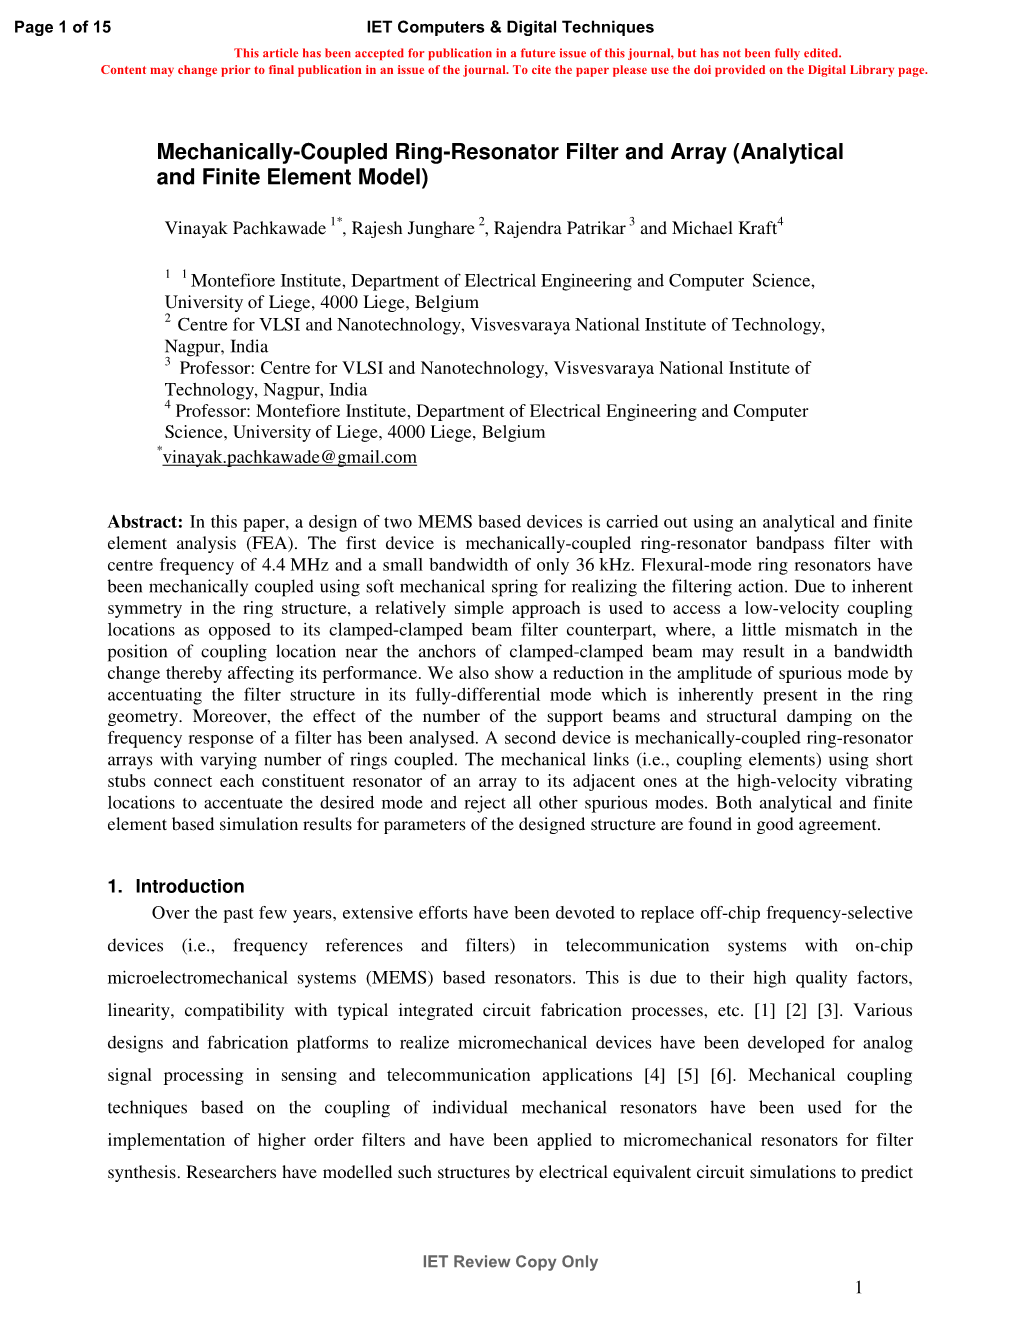 Mechanically-Coupled Ring-Resonator Filter and Array (Analytical and Finite Element Model)